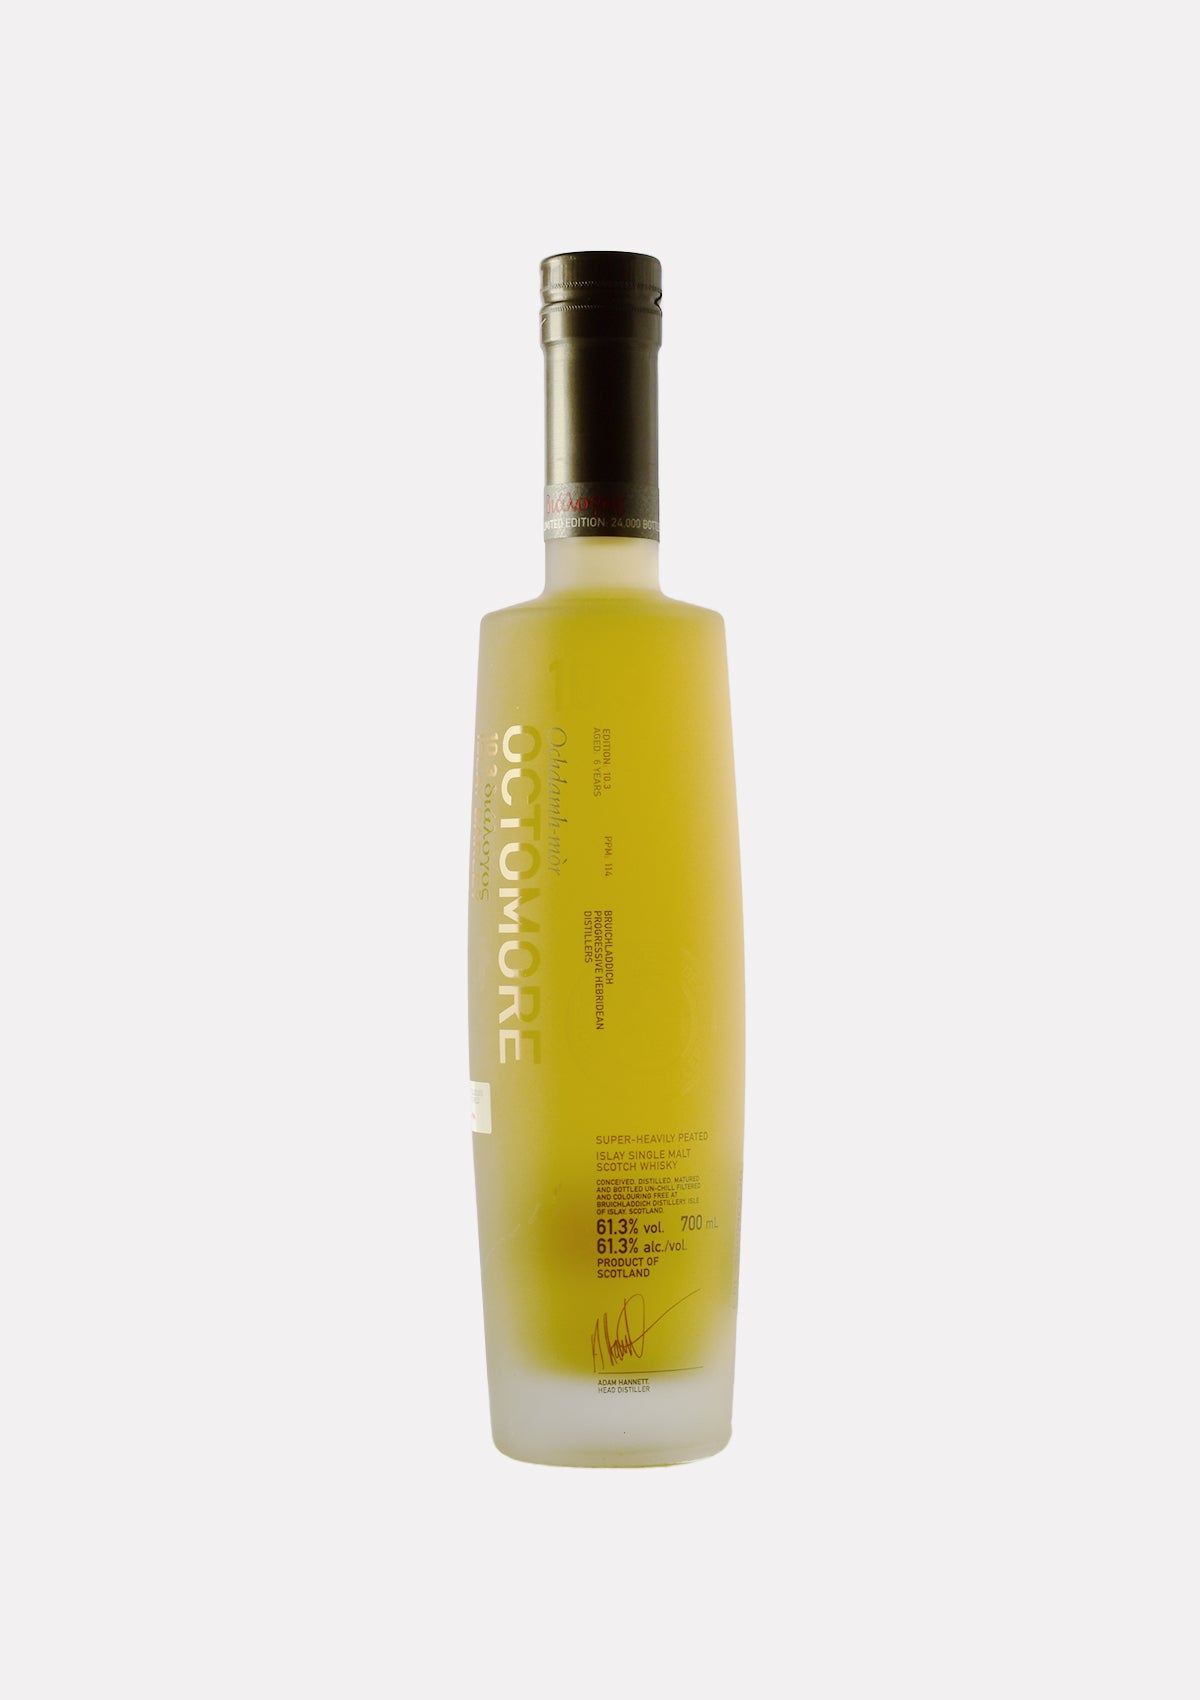 Octomore 10.3 114 ppm